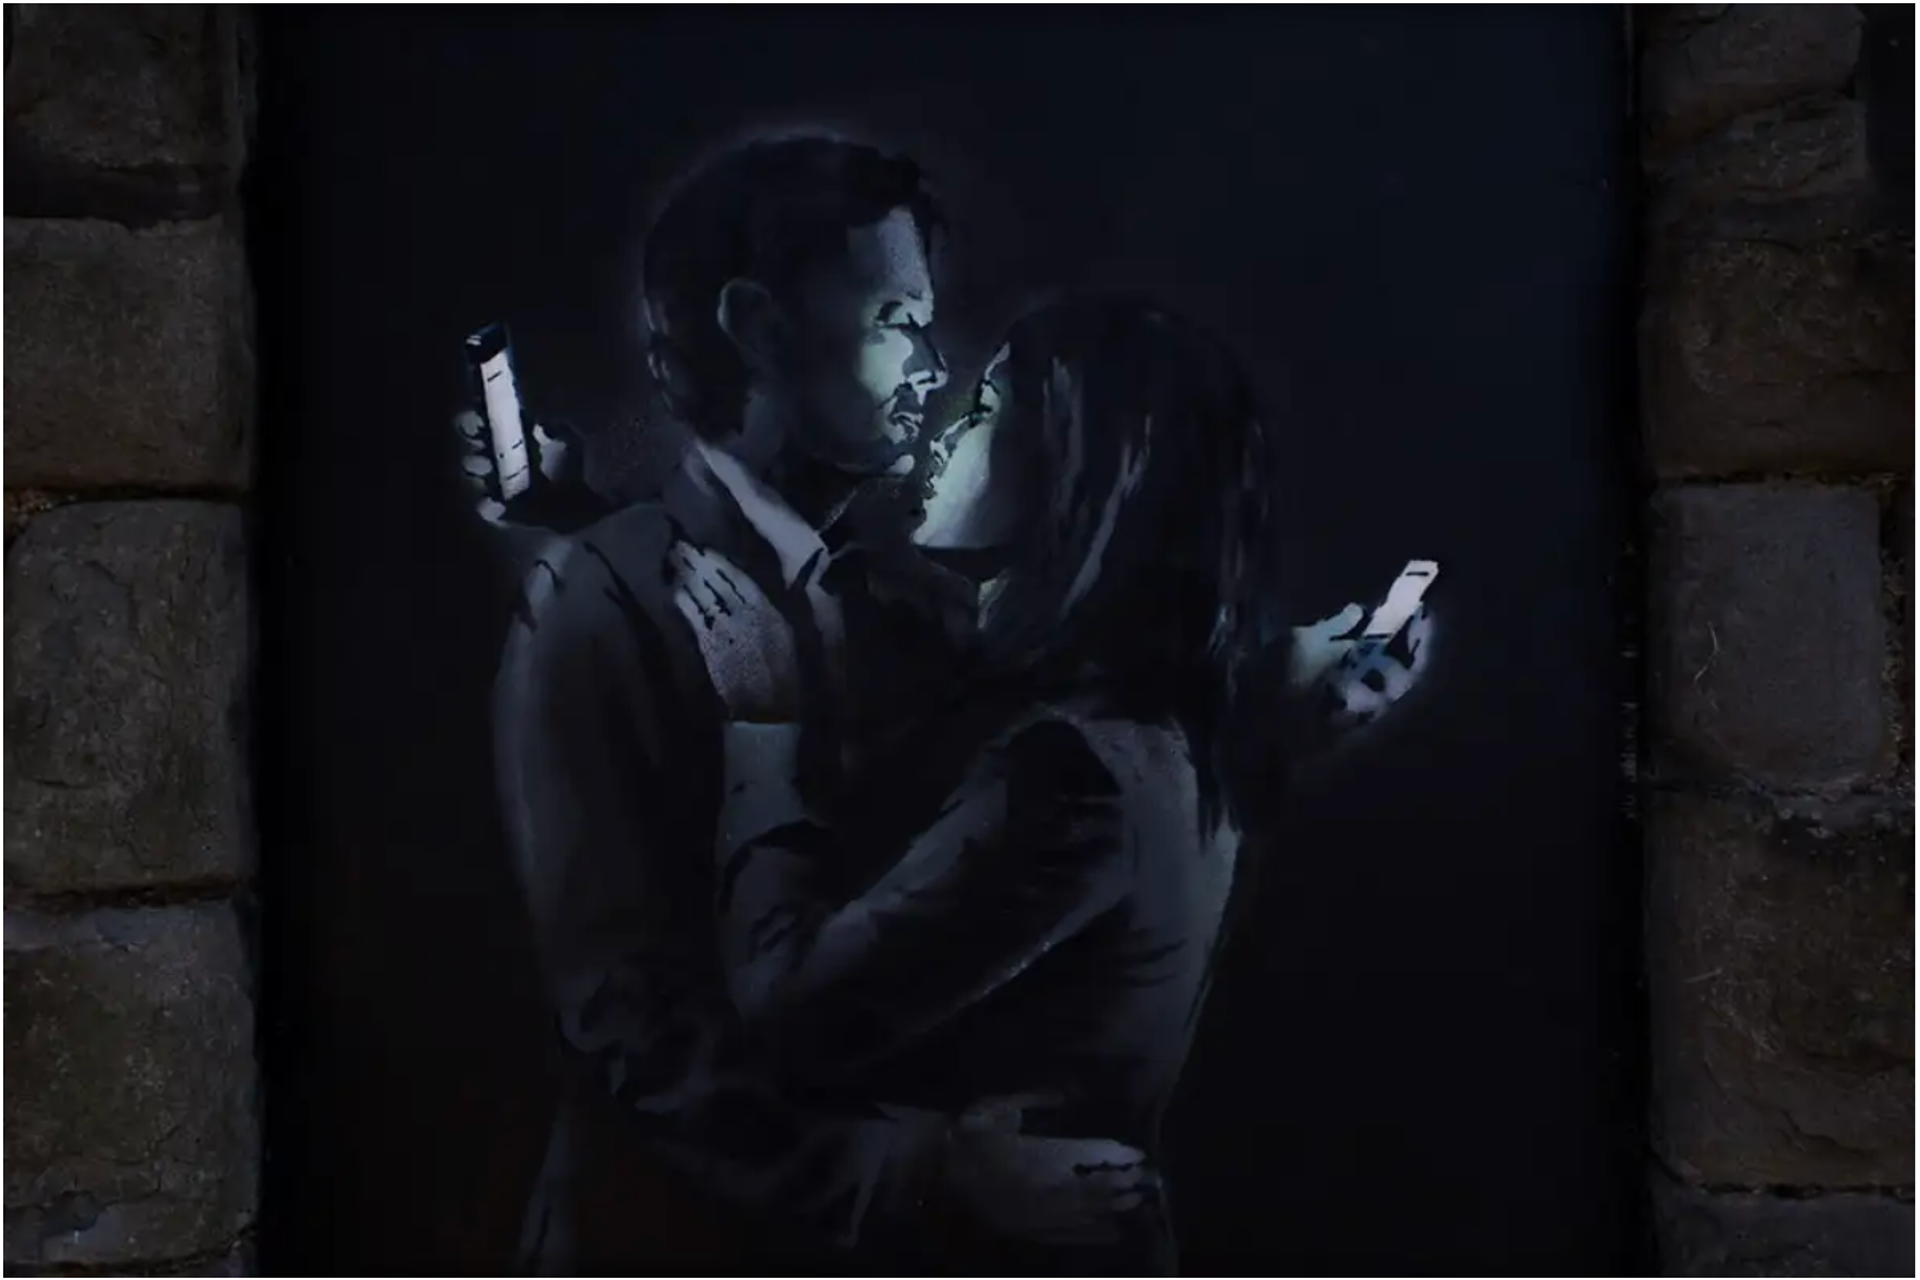  A monochromatic stencil on a wooden panel affixed to a brick wall portrays a couple in an intimate embrace, each fixated on the screen of their phone over the other's shoulder.